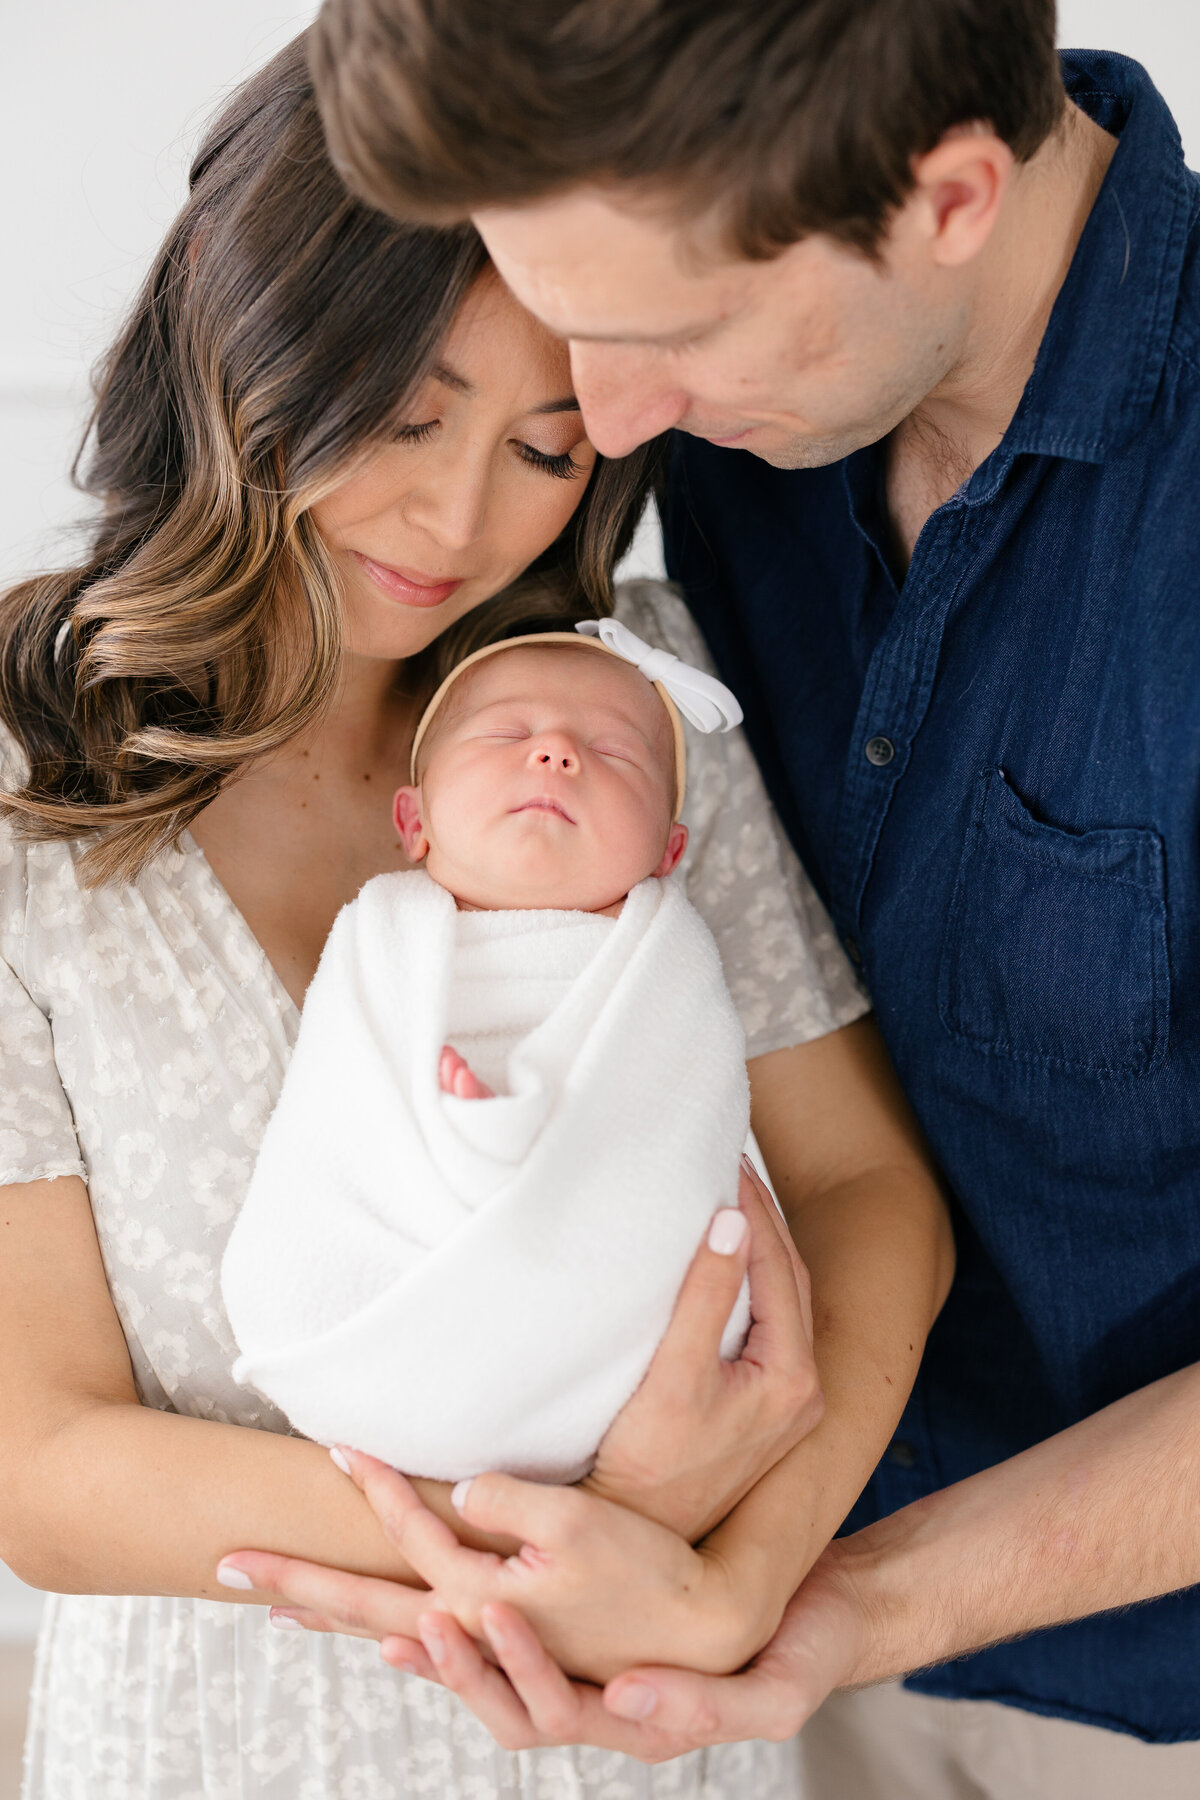 New parents snuggling and holding their sleeping baby girl who is swaddled in a white wrap